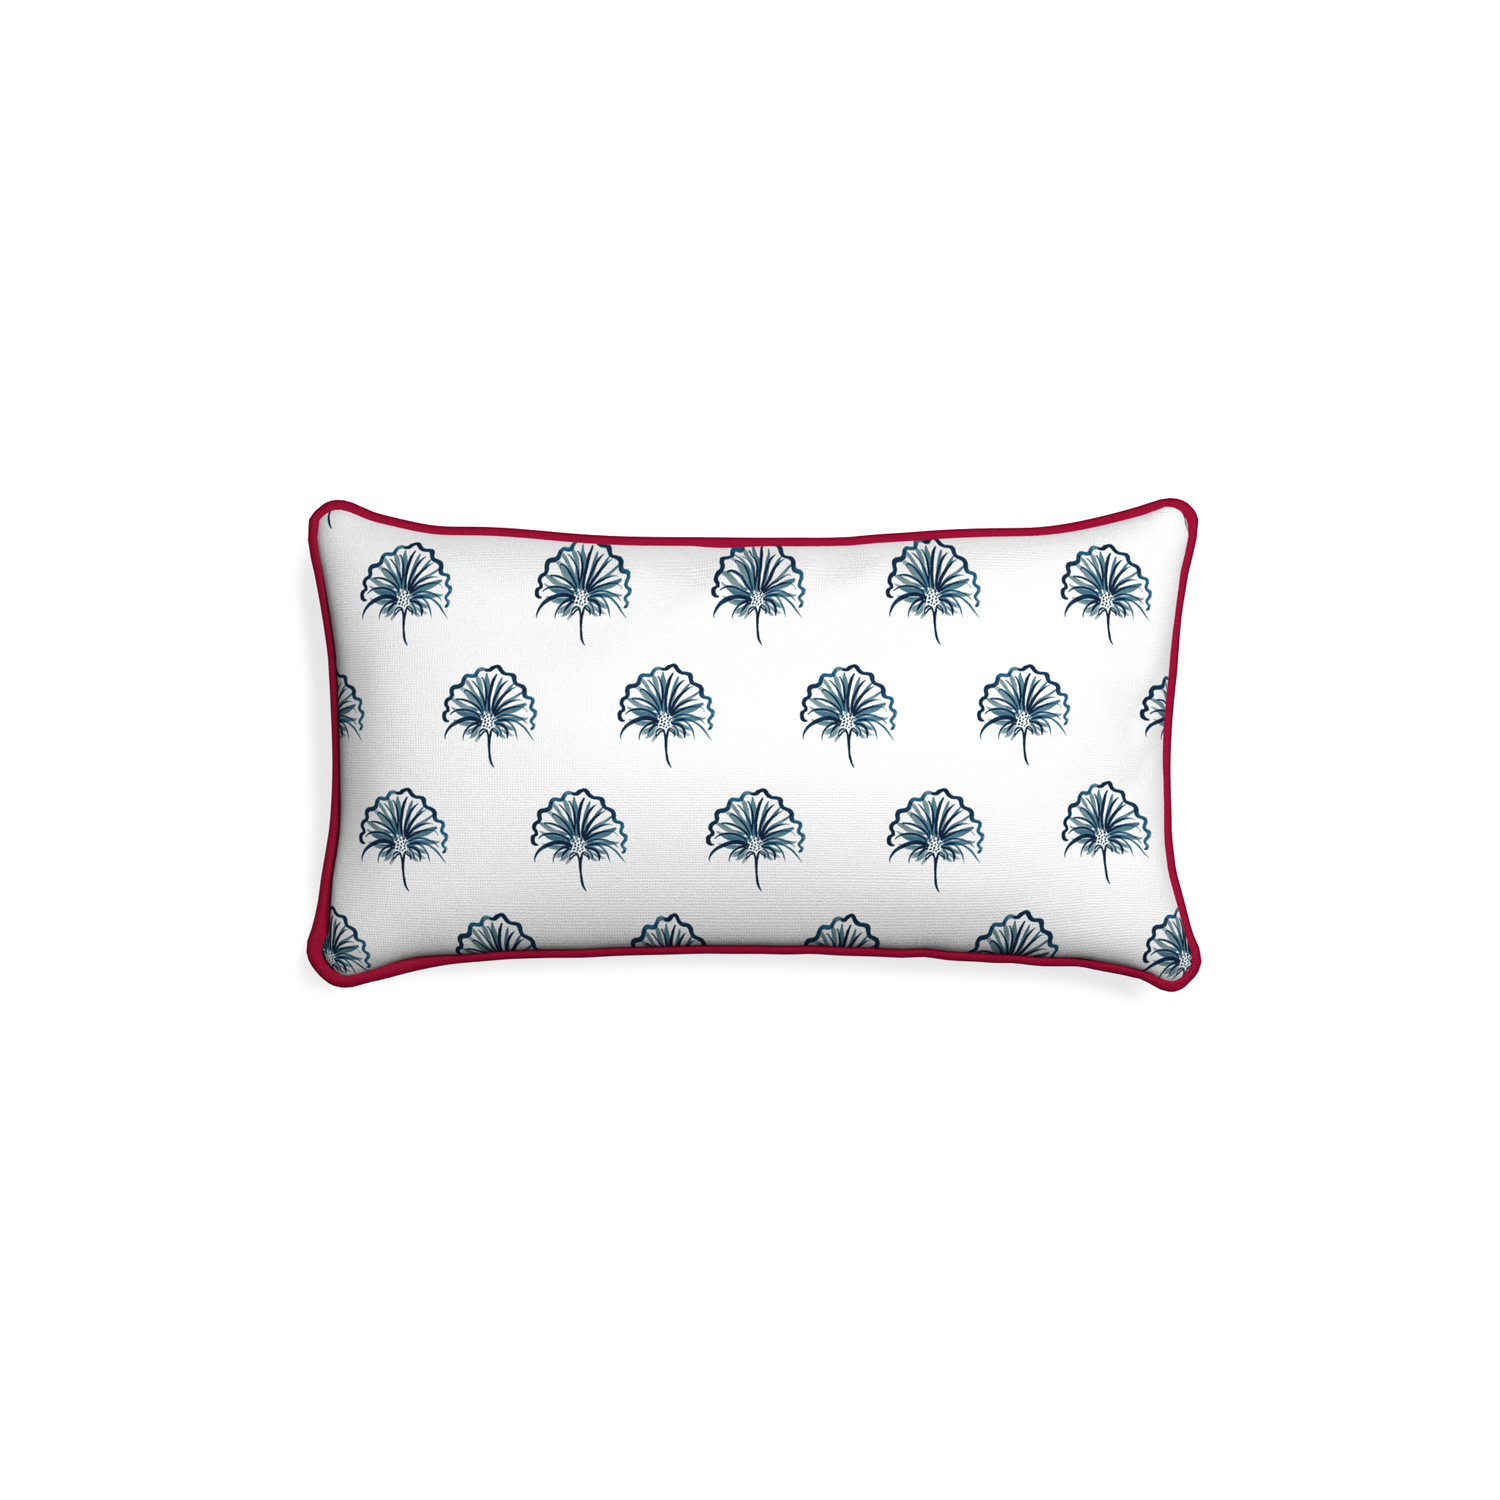 Petite-lumbar penelope midnight custom floral navypillow with raspberry piping on white background